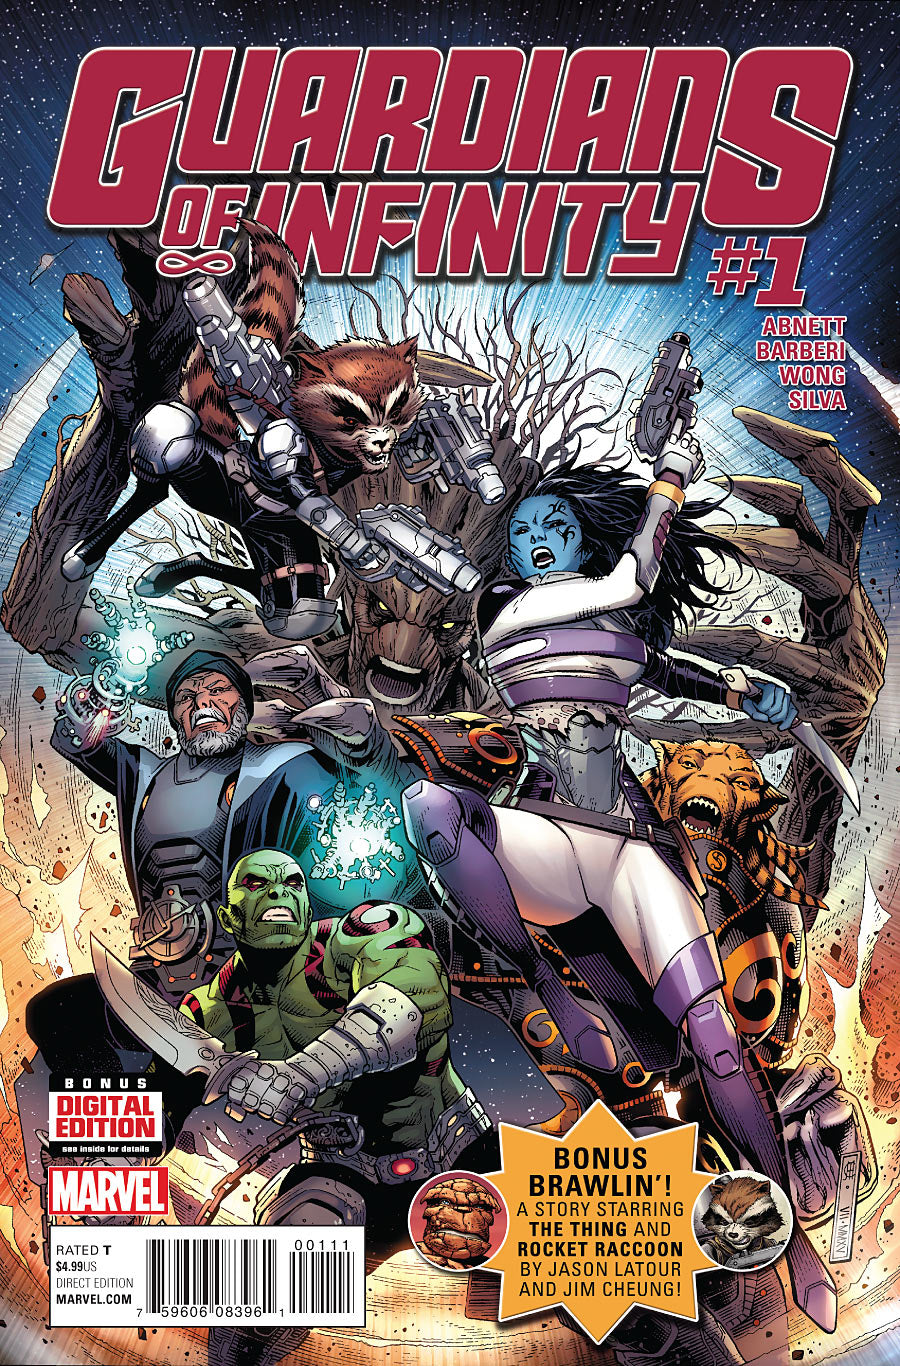 Guardians Of Infinity #1